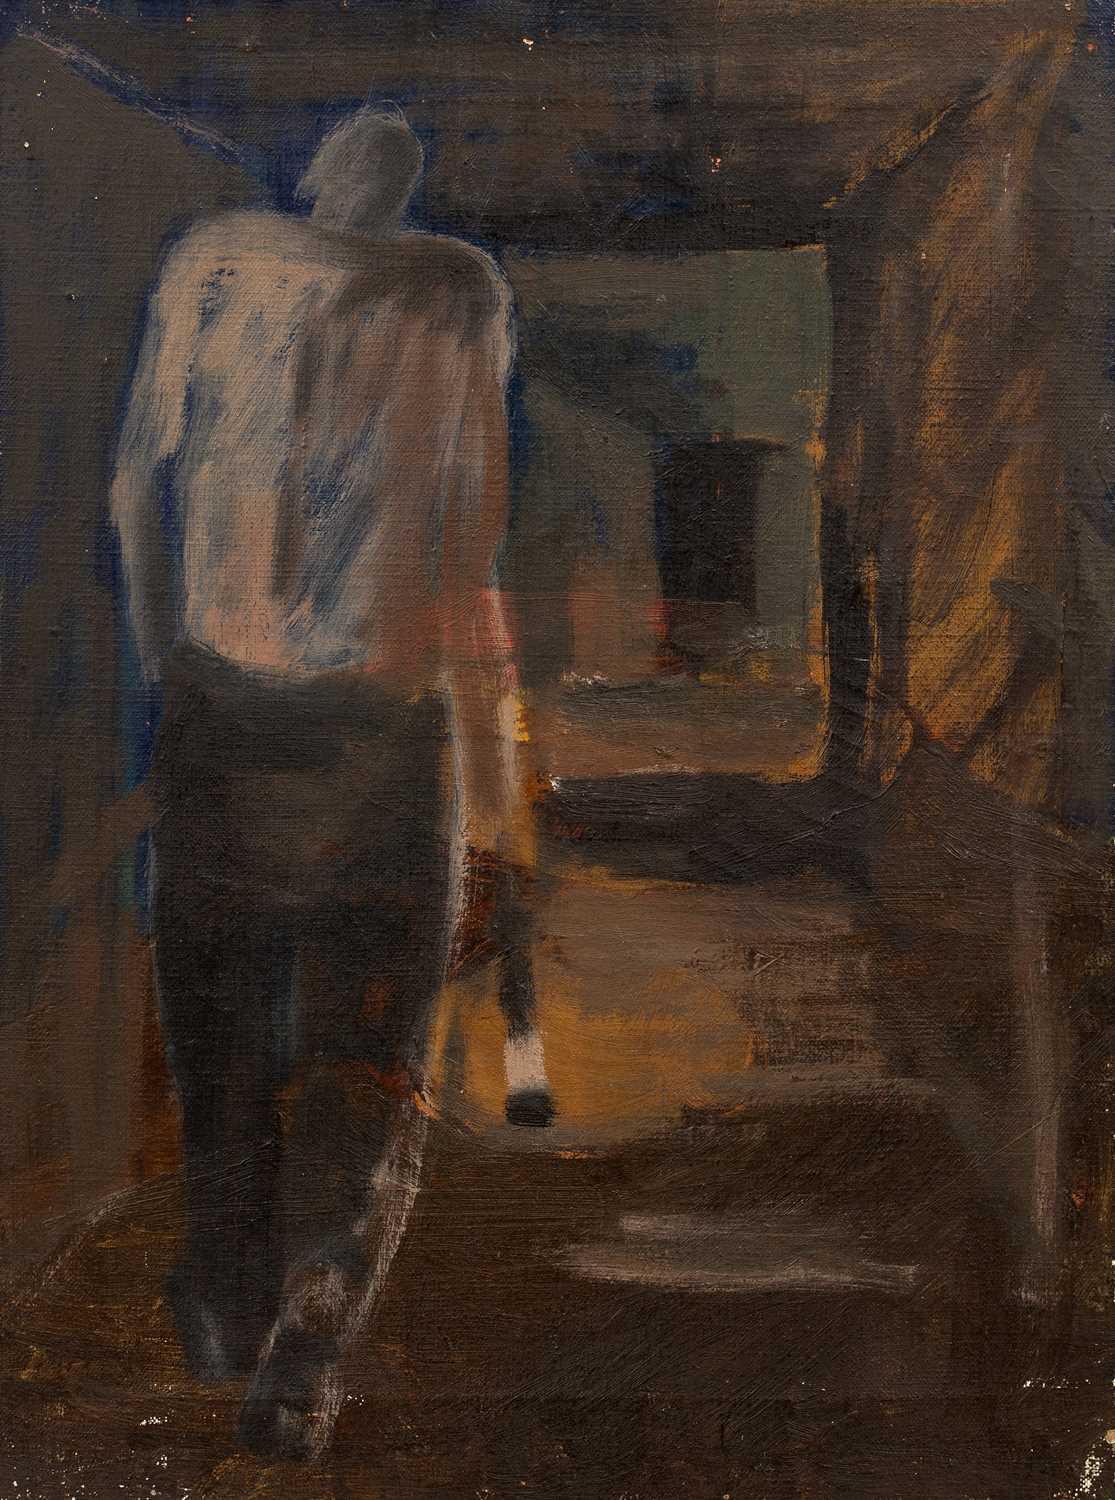 George Bissill (1896-1973) Mining Sketch 3 oil on canvas 41 x 30cm, unframed.